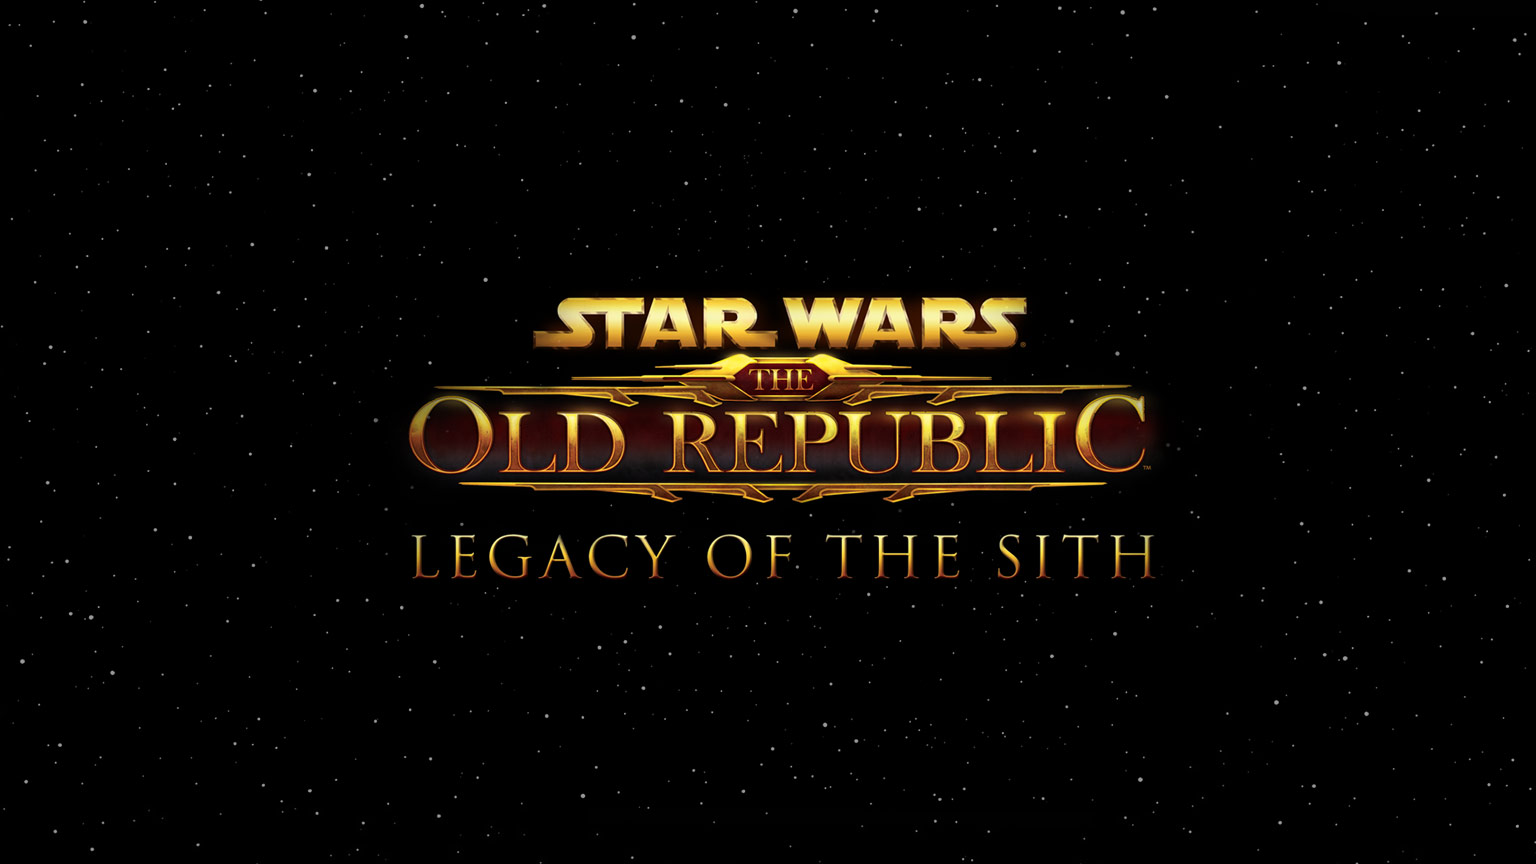 Plik:The Old Republic Legacy of the Sith.jpg